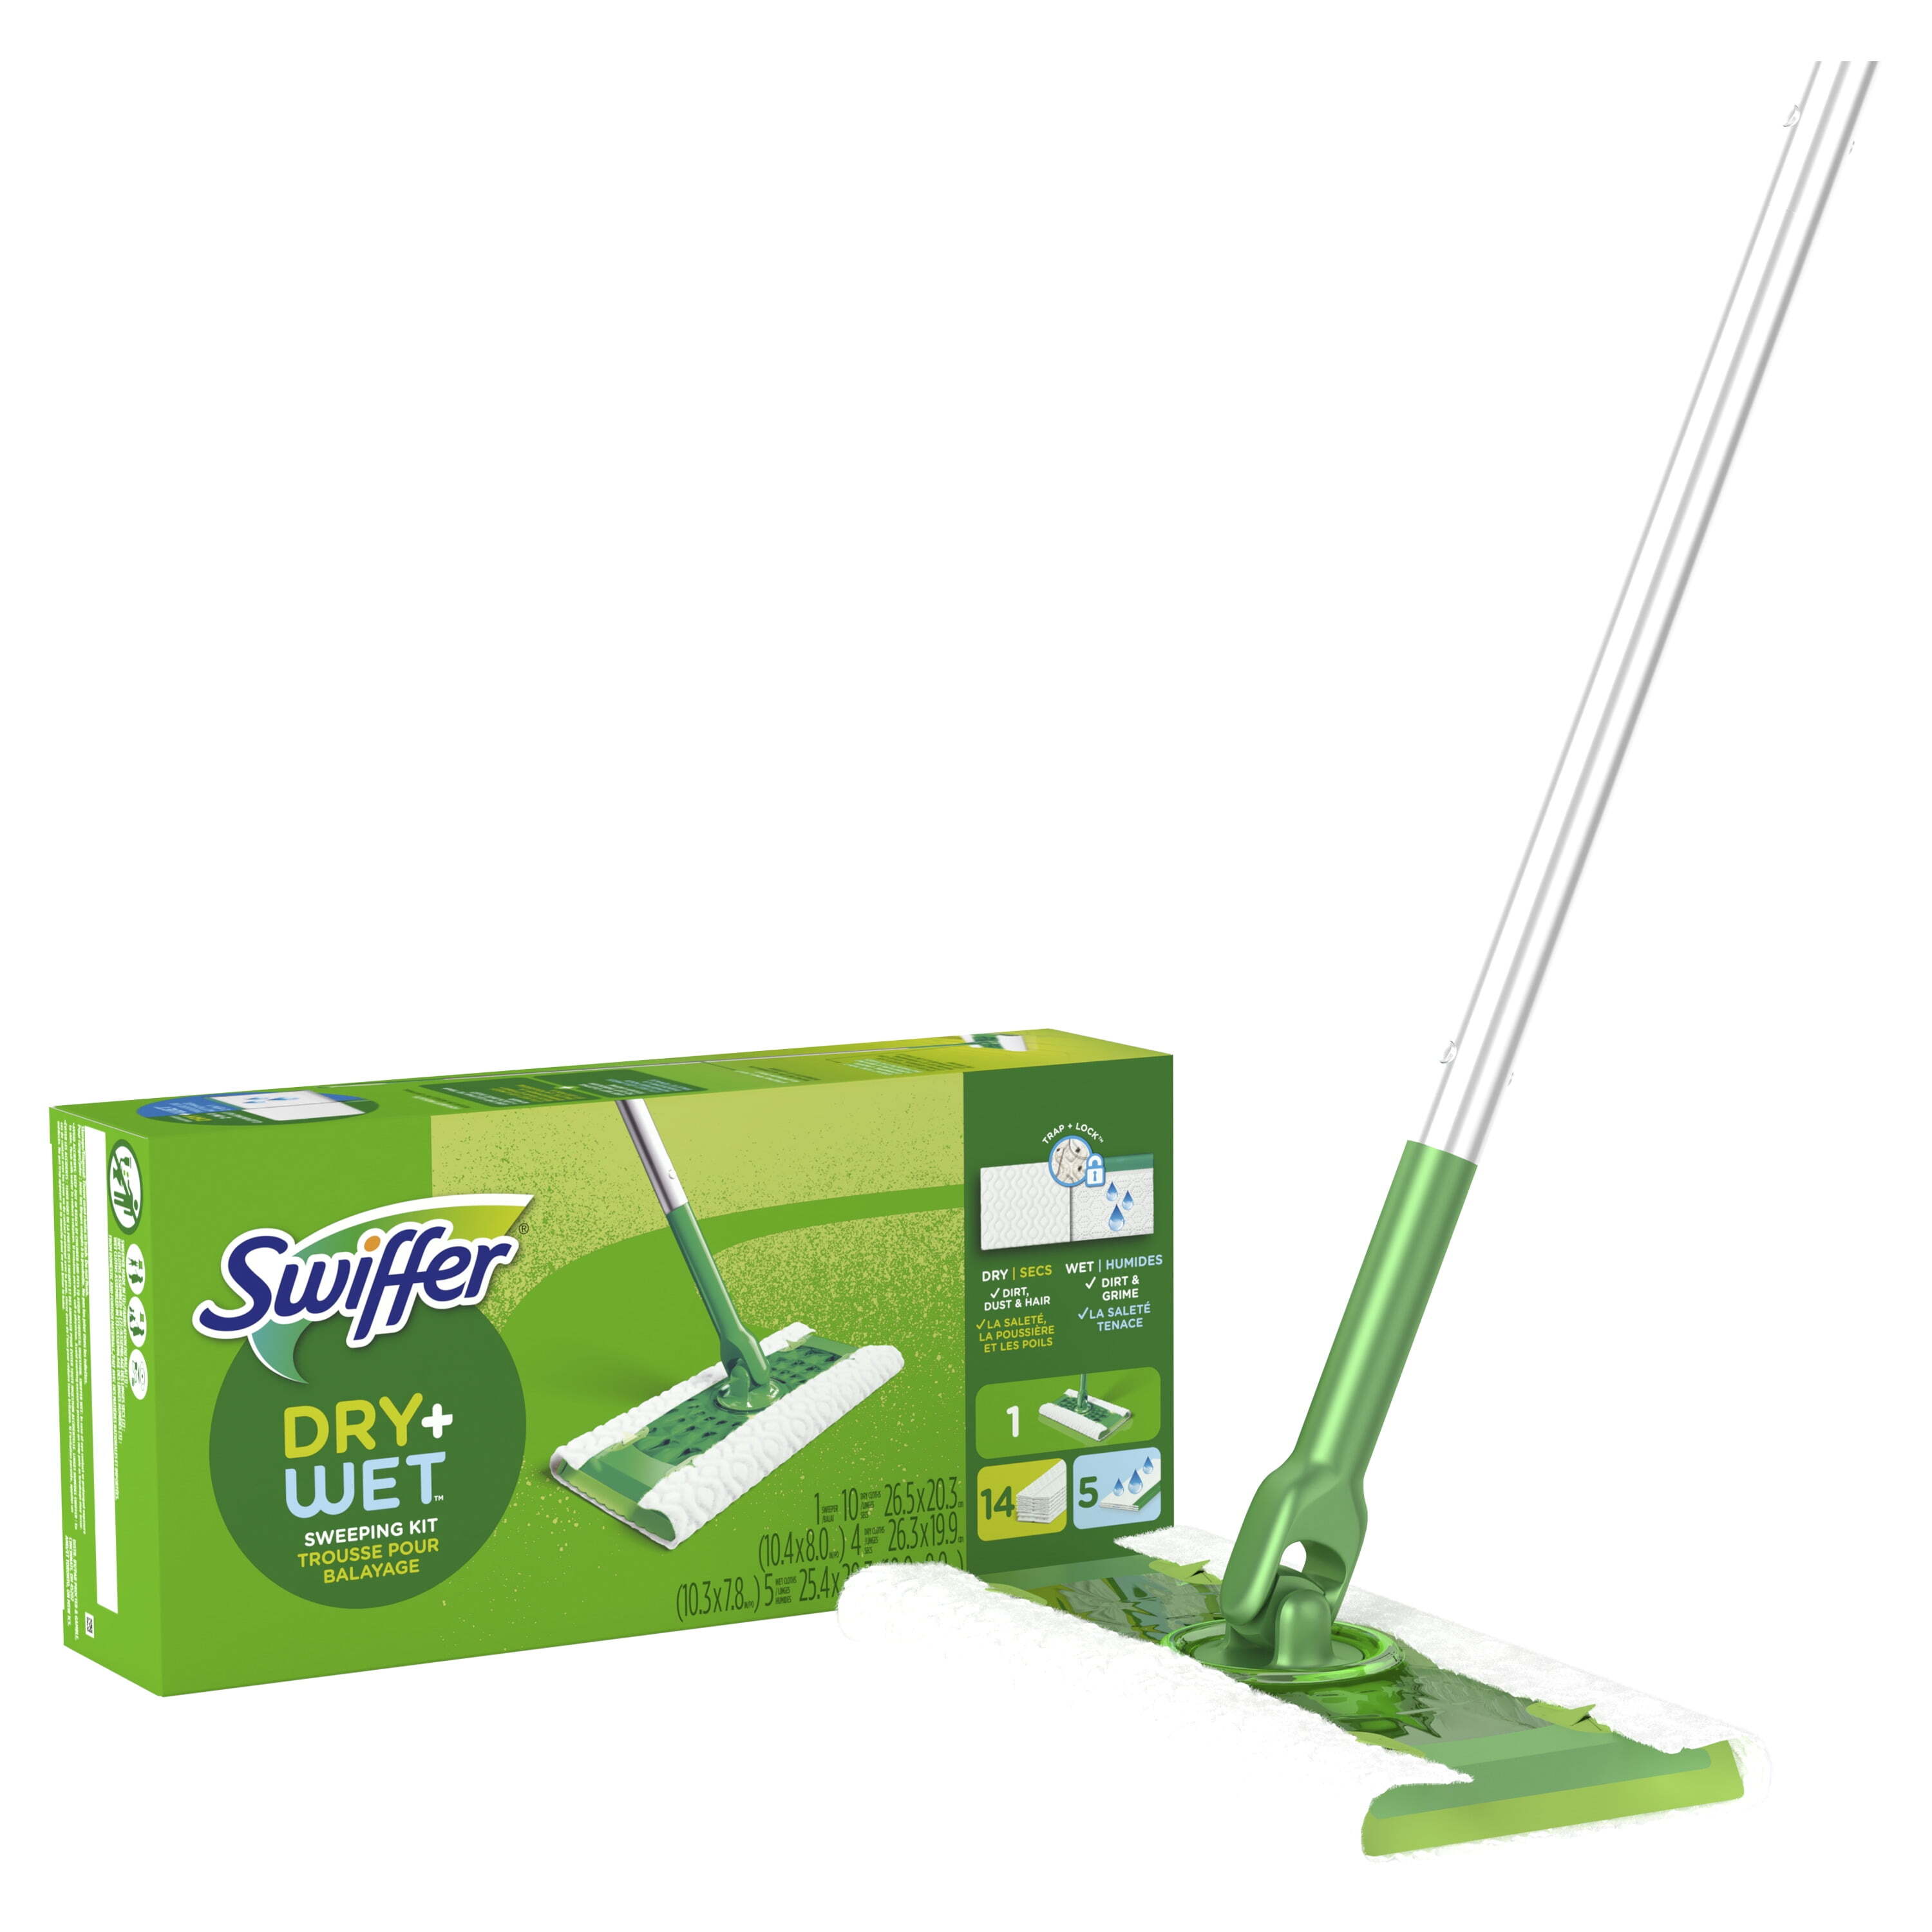 Swiffer Sweeper 2-in-1 Sweep and Mop Starter Kit,1 Mop + 19 Refills - image 1 of 10